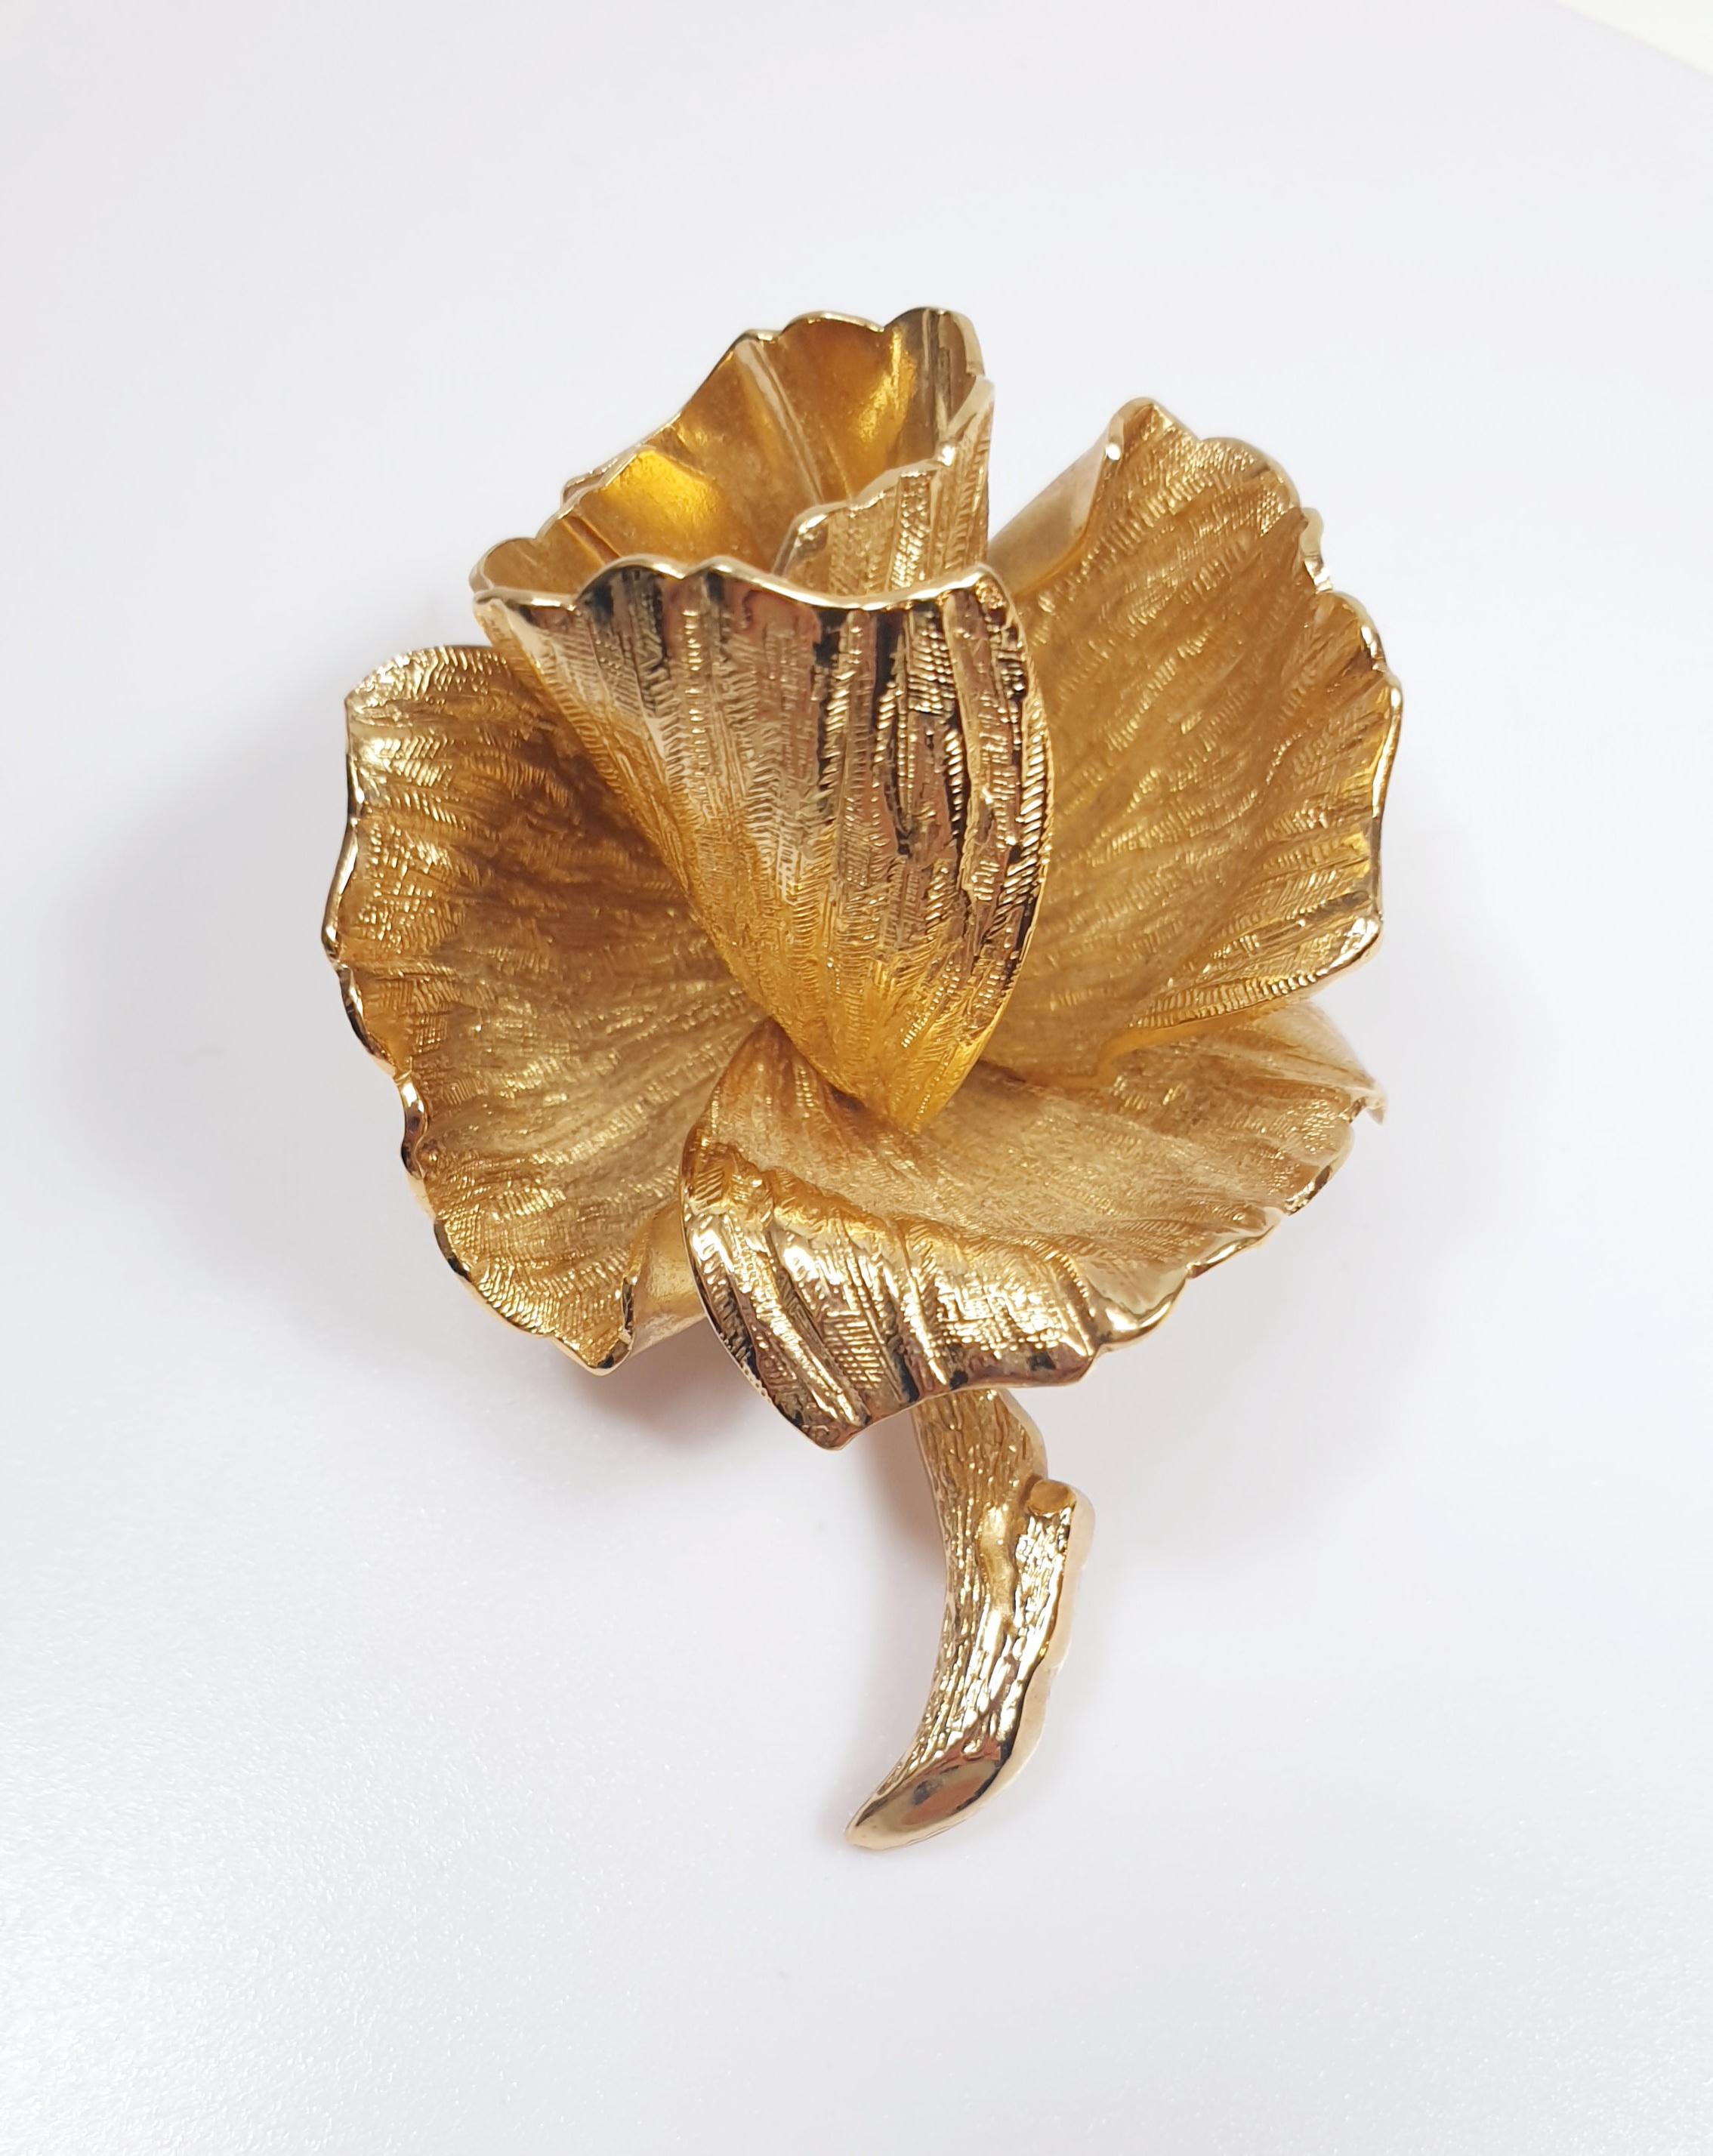 RARE Grosse 1966 Germany Gold plated flower brooch. A beautiful shiny gold plated textured brooch depicting a flower in full bloom. It has the cartridge on the back reading from top to bottom, 19, Grosse, 66, GERMANY. Grosse released similar